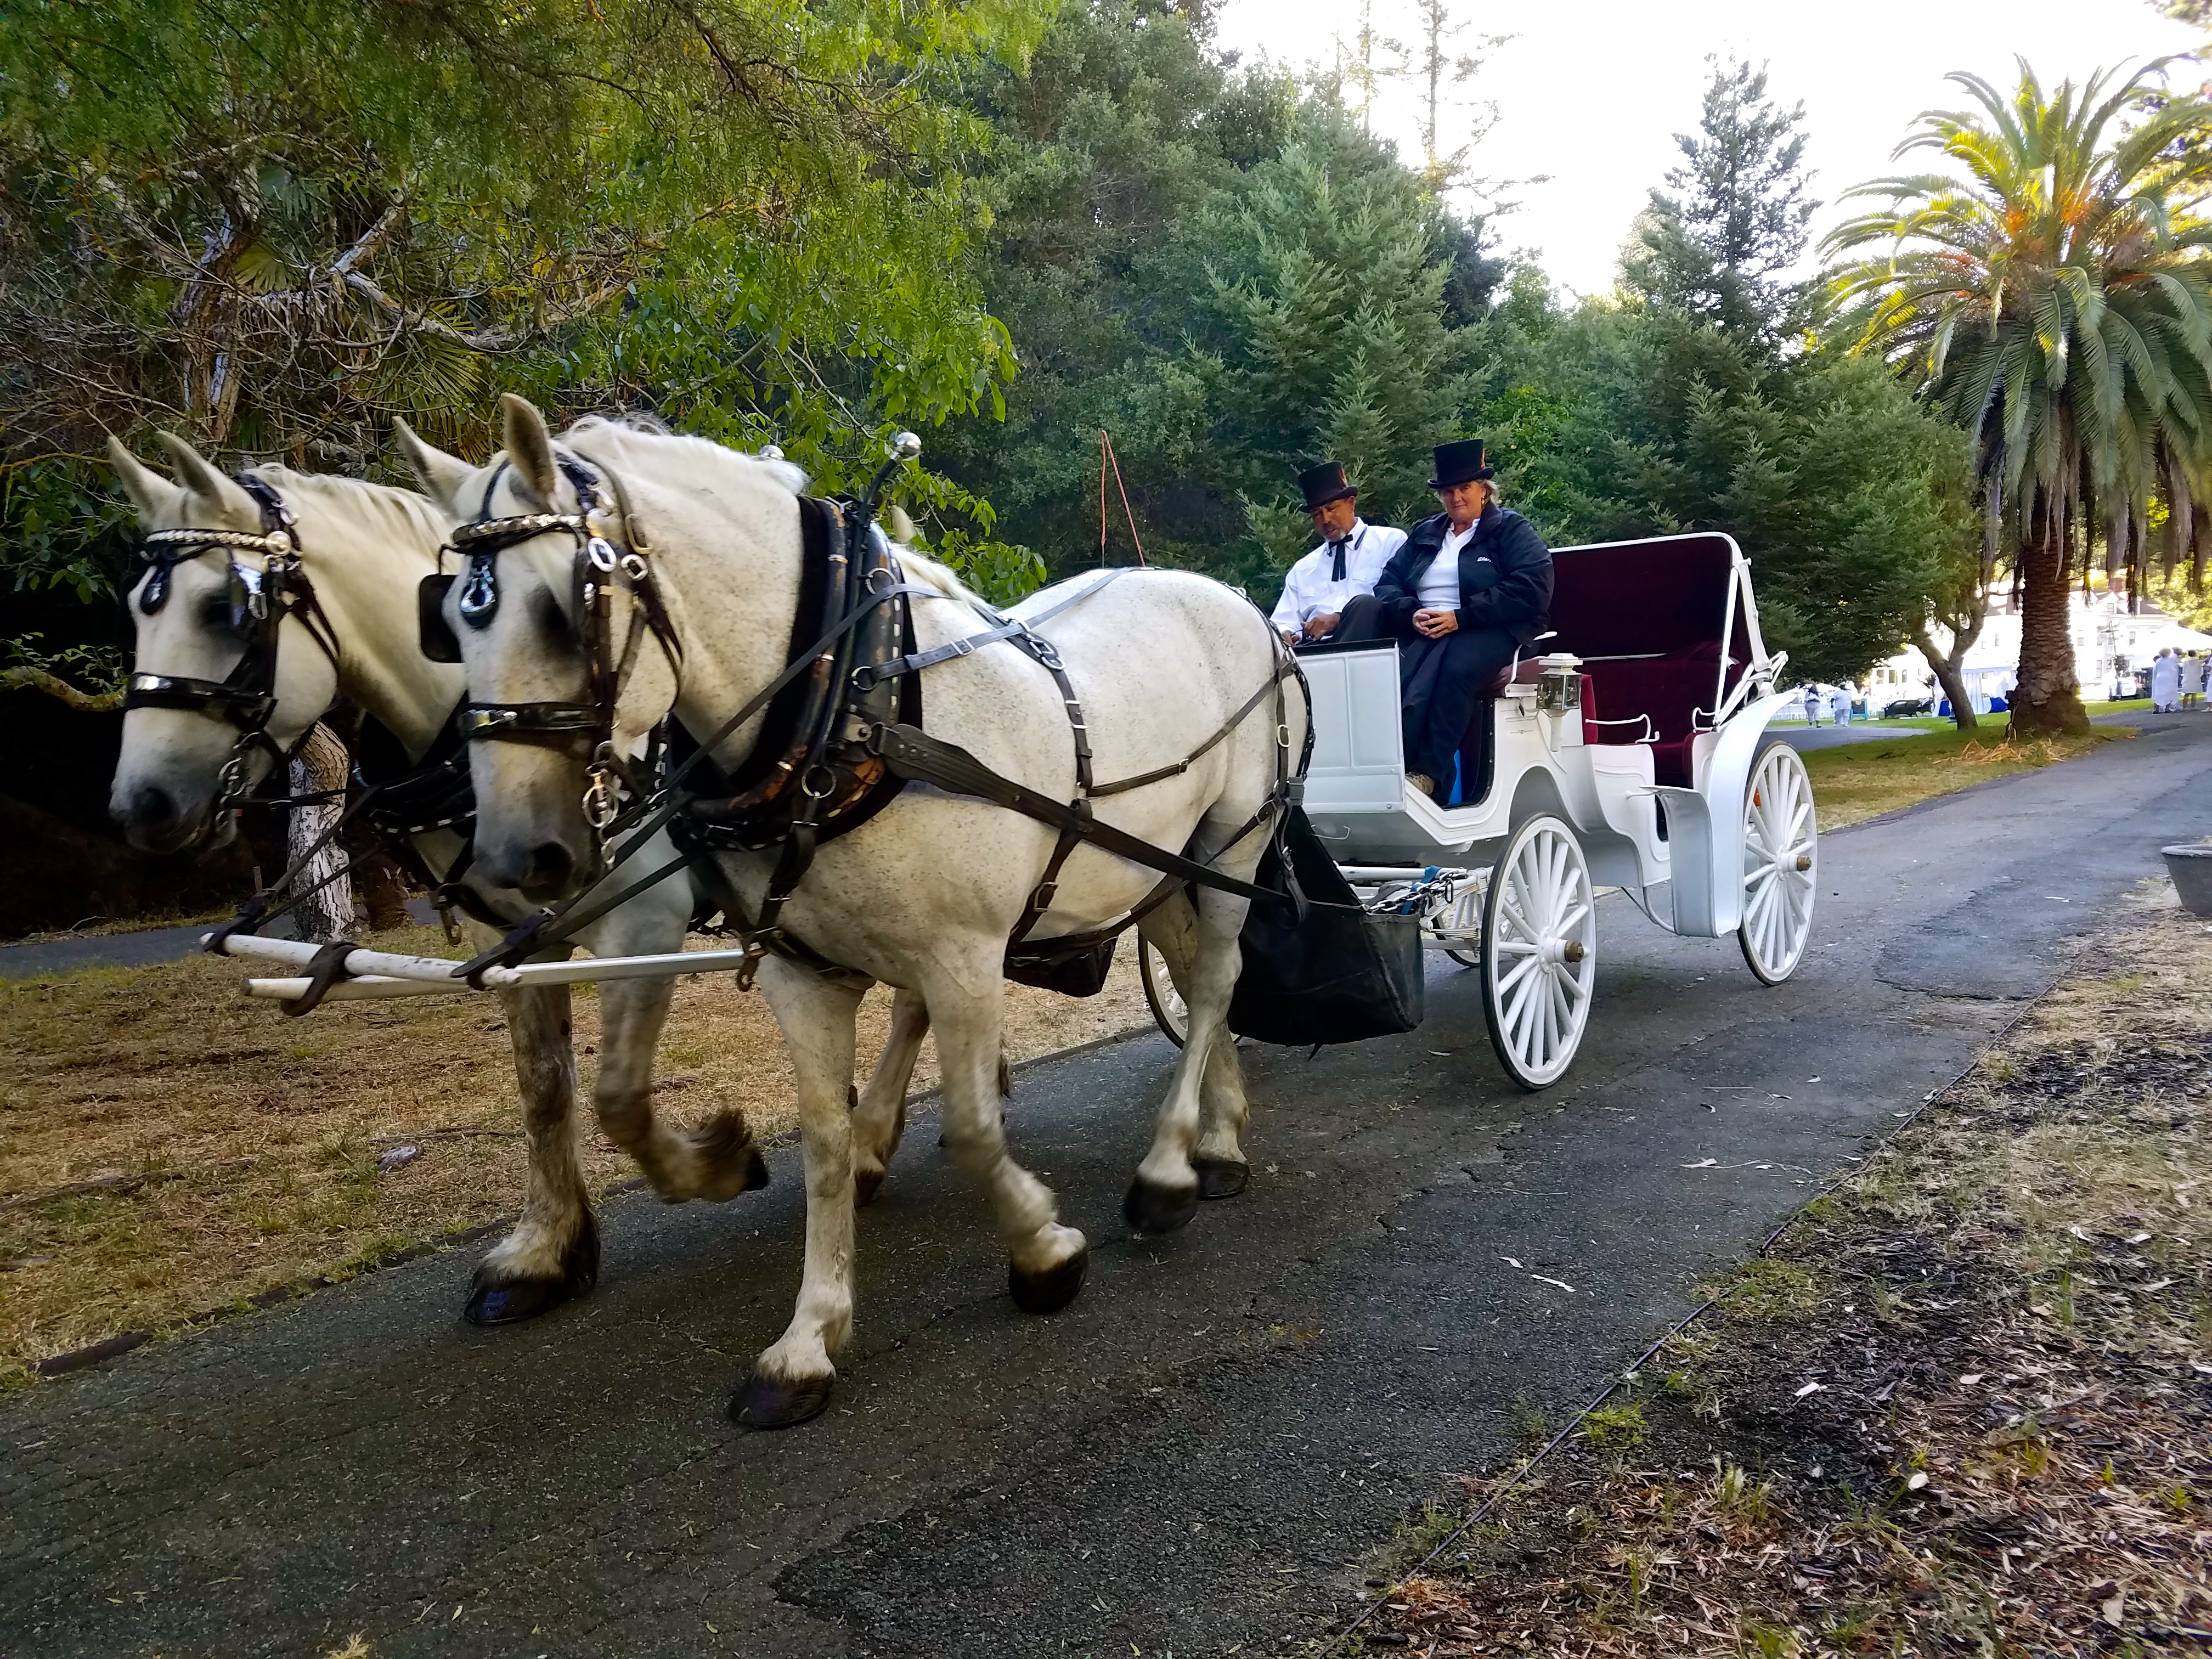 Horse-drawn carriage rides right along side our stage at the Dunsmuir Hellman Historic Estate in Oakland last Saturday night